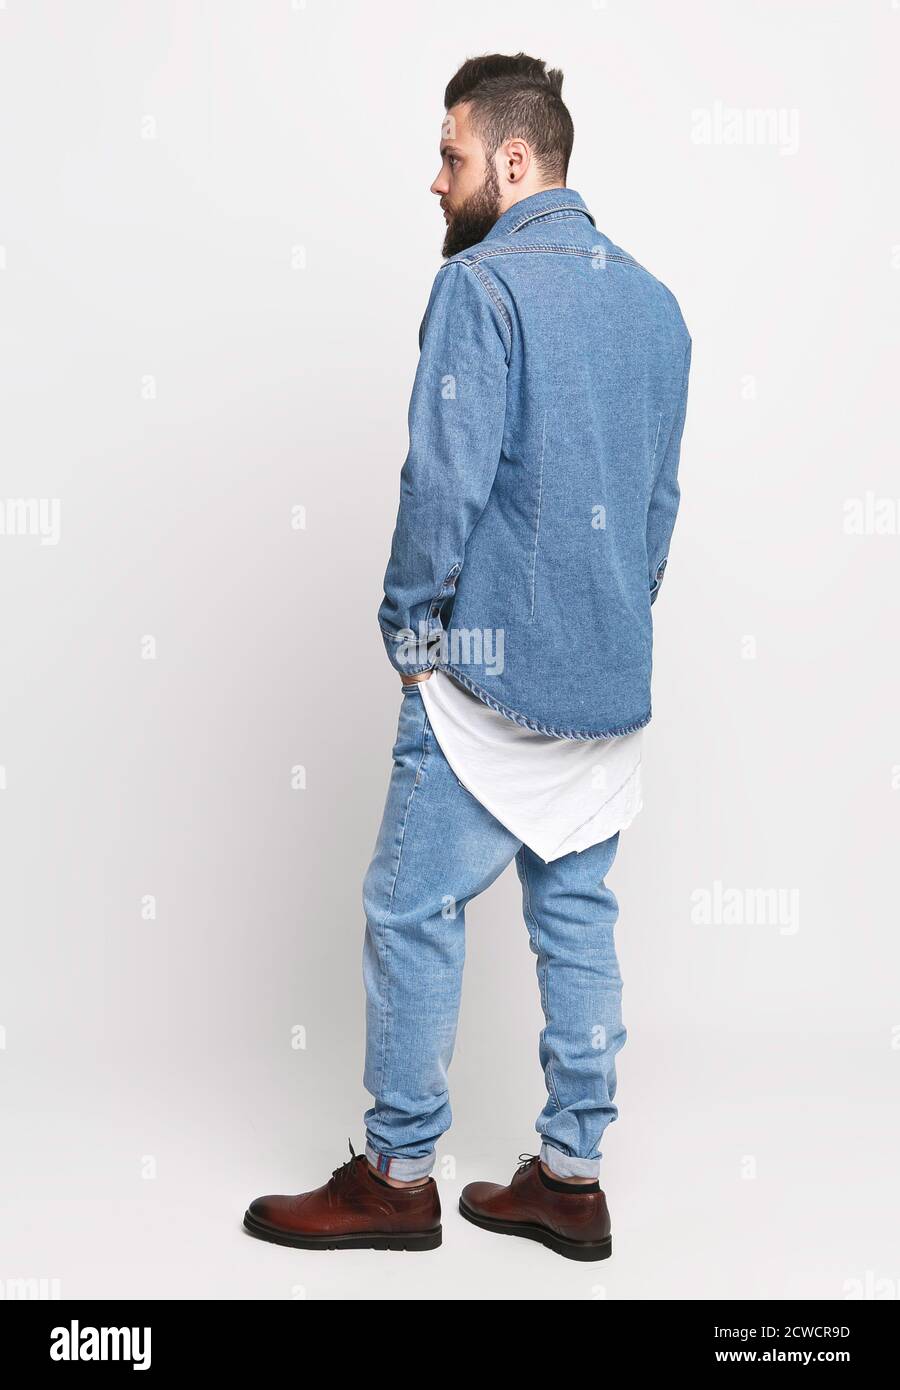 A3 Poster Mock-Up - Man In A Denim Shirt Holding A Poster On A White  Background. Hipster Aesthetic Stock Photo, Picture and Royalty Free Image.  Image 68188756.